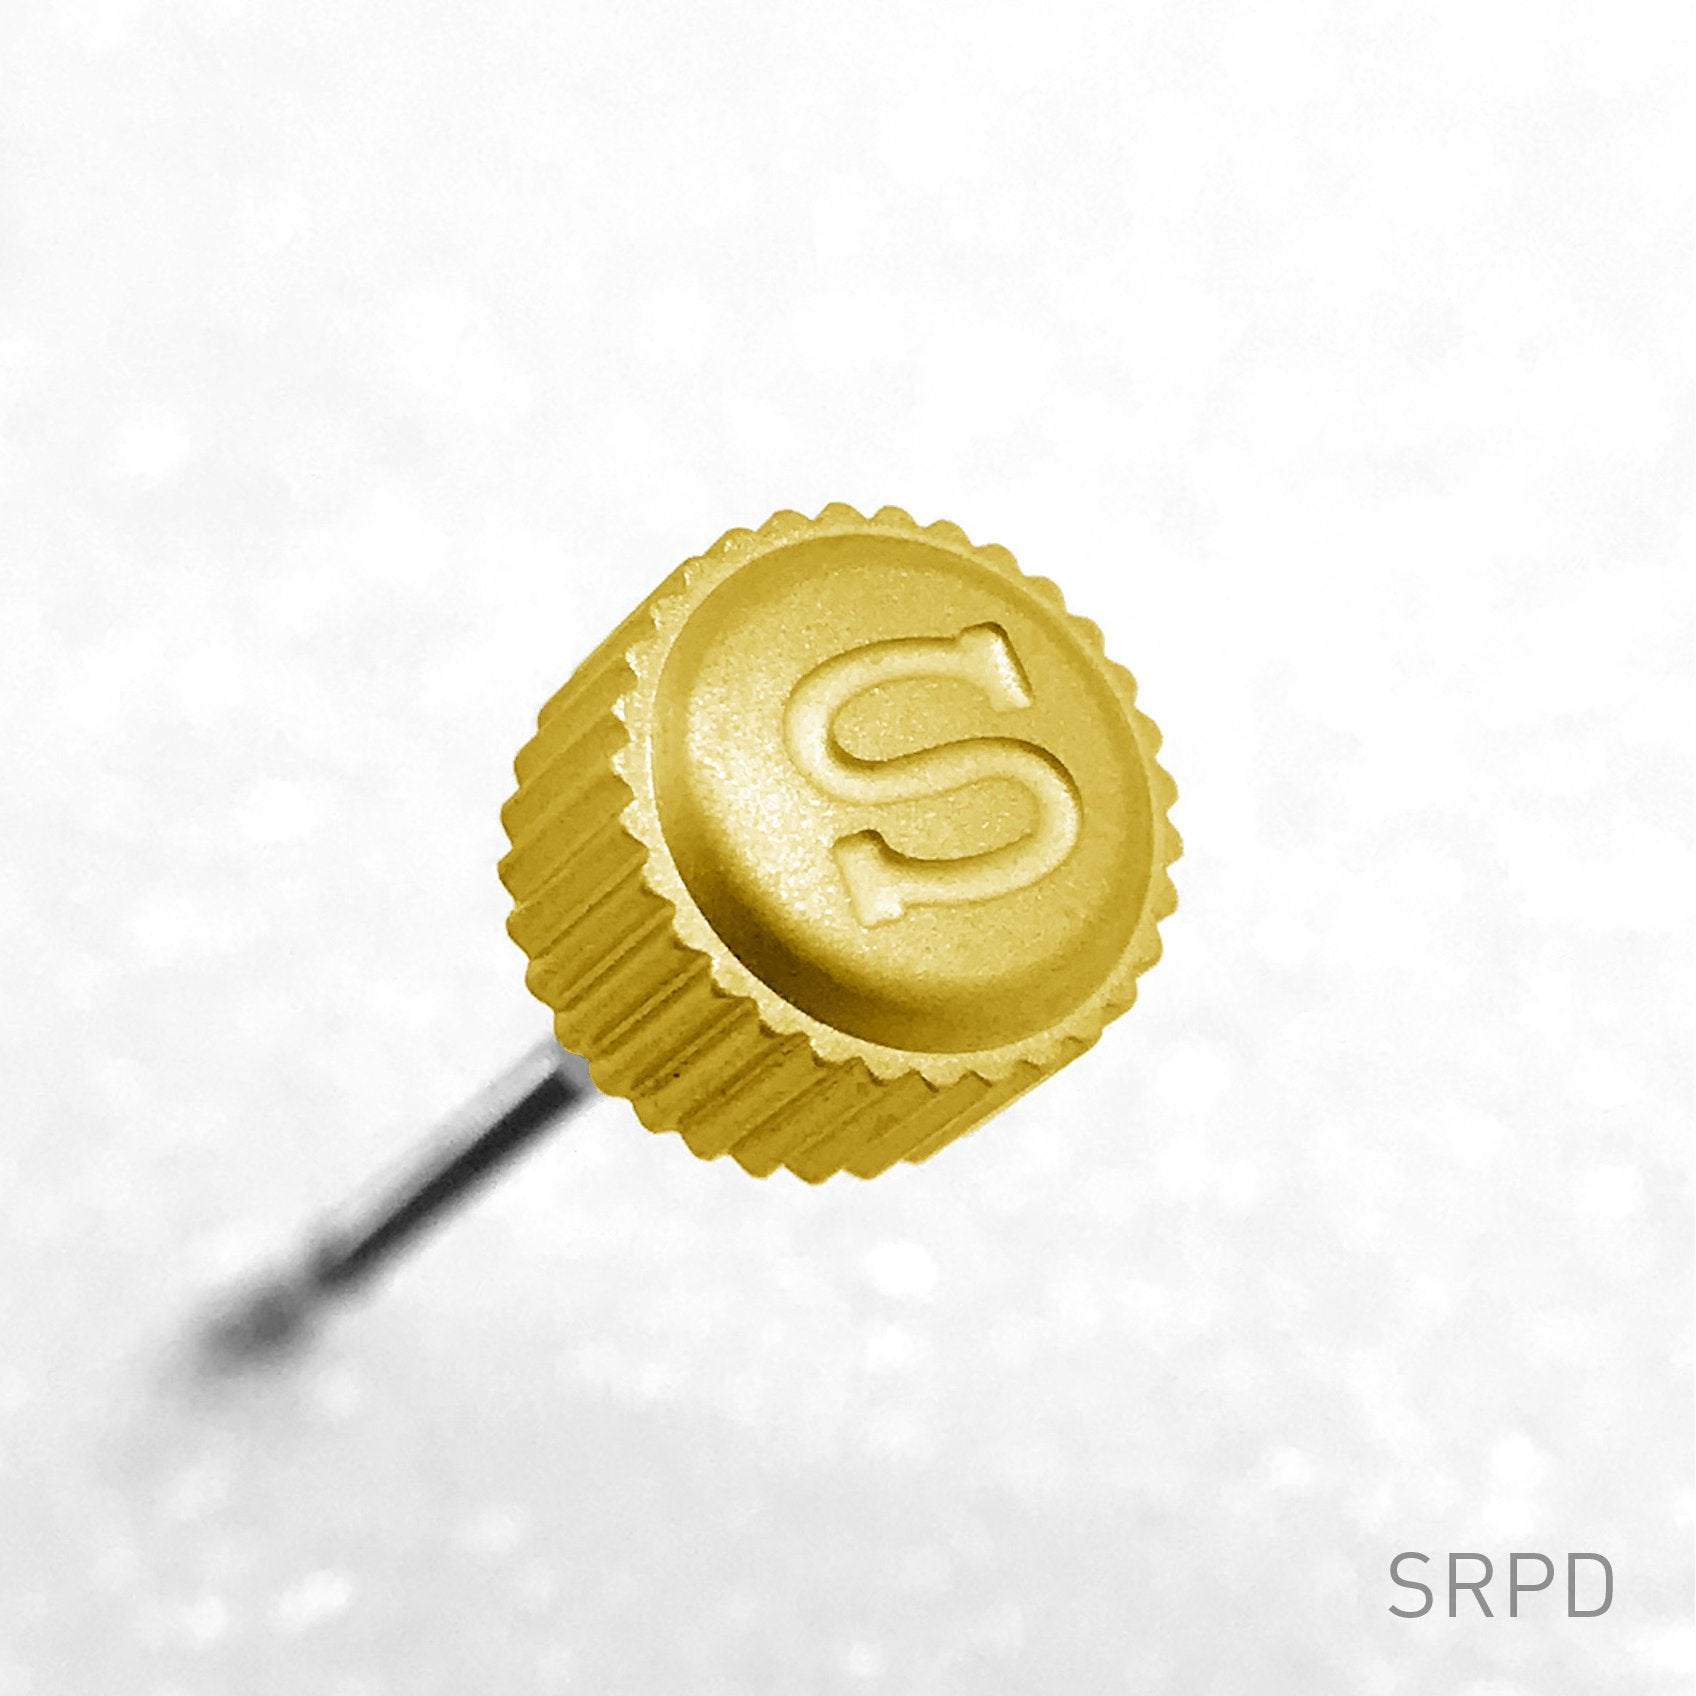 Crown - SRPD - Bead Blasted PVD Gold - "S"